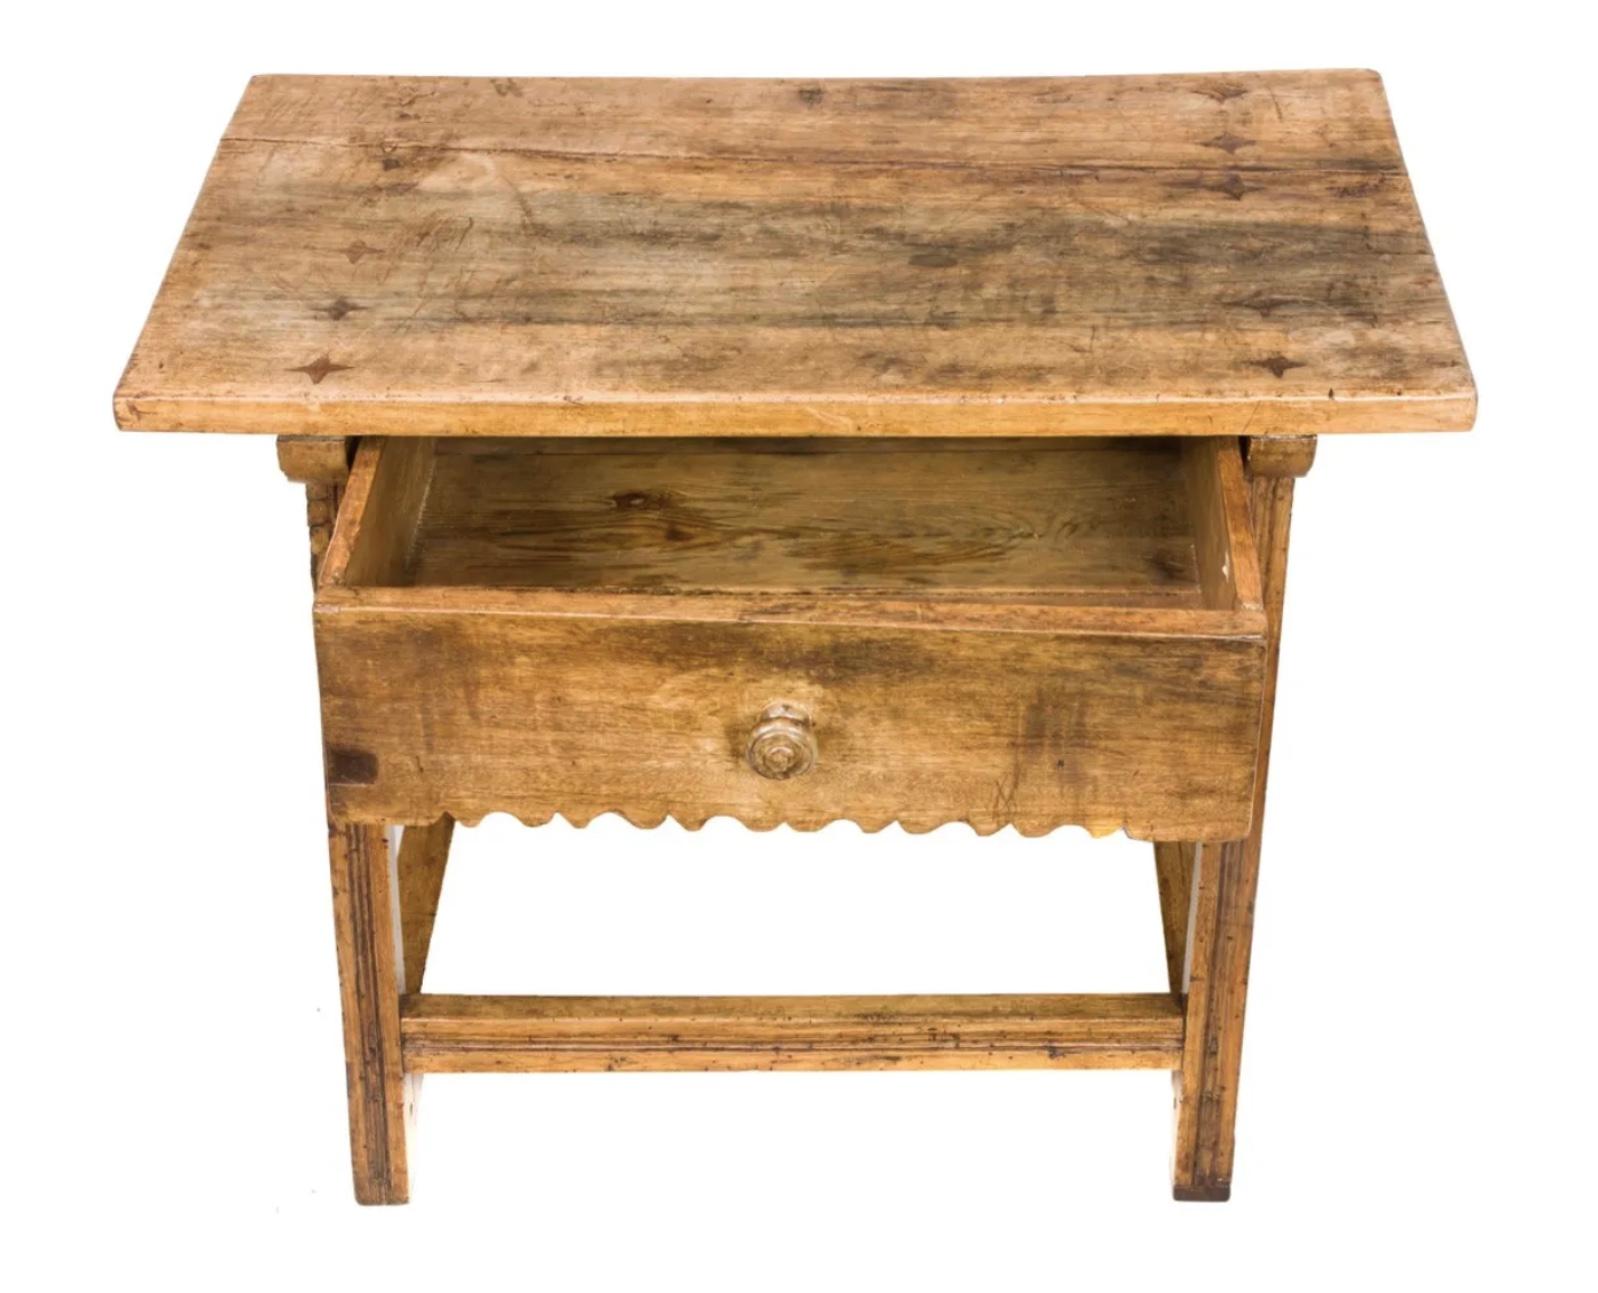 A superb Spanish Colonial one-drawer hacienda table, 18th century. Having a rectangular top, inlaid with stars above a single suspended drawer supported by trestle-form legs. The legs joined by a simple stretcher. Wonderful old wear and patina.